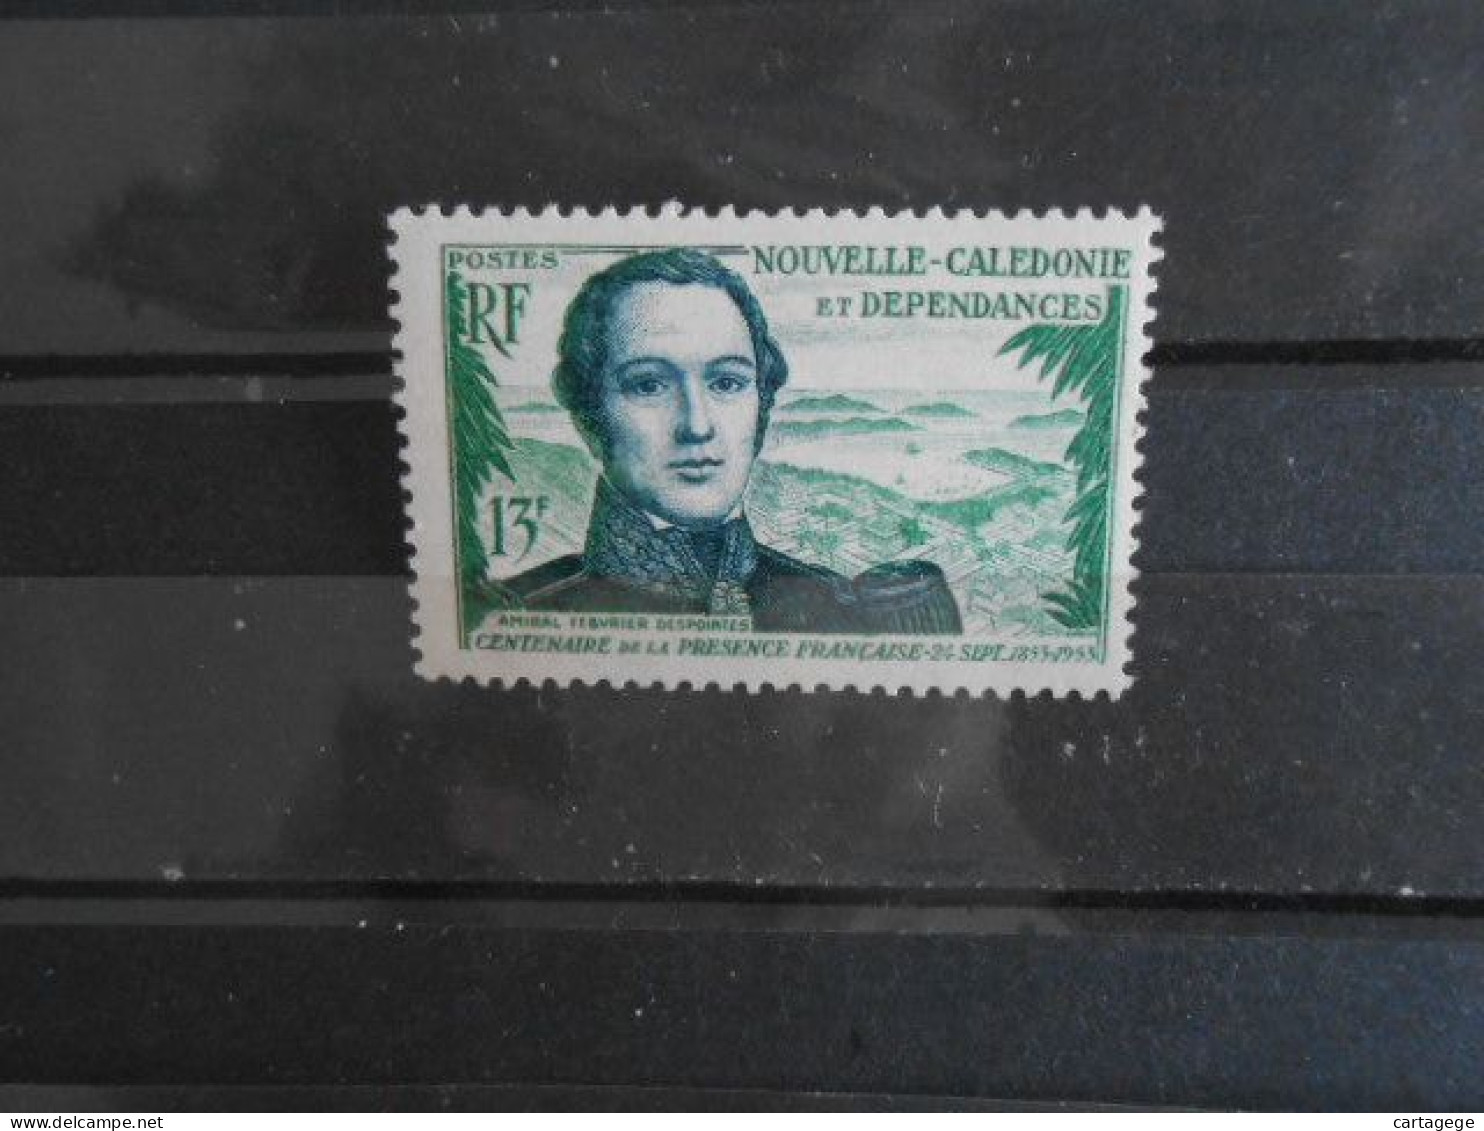 NOUVELLE-CALEDONIE YT 283 AMIRAL DESPOINTES** - Unused Stamps